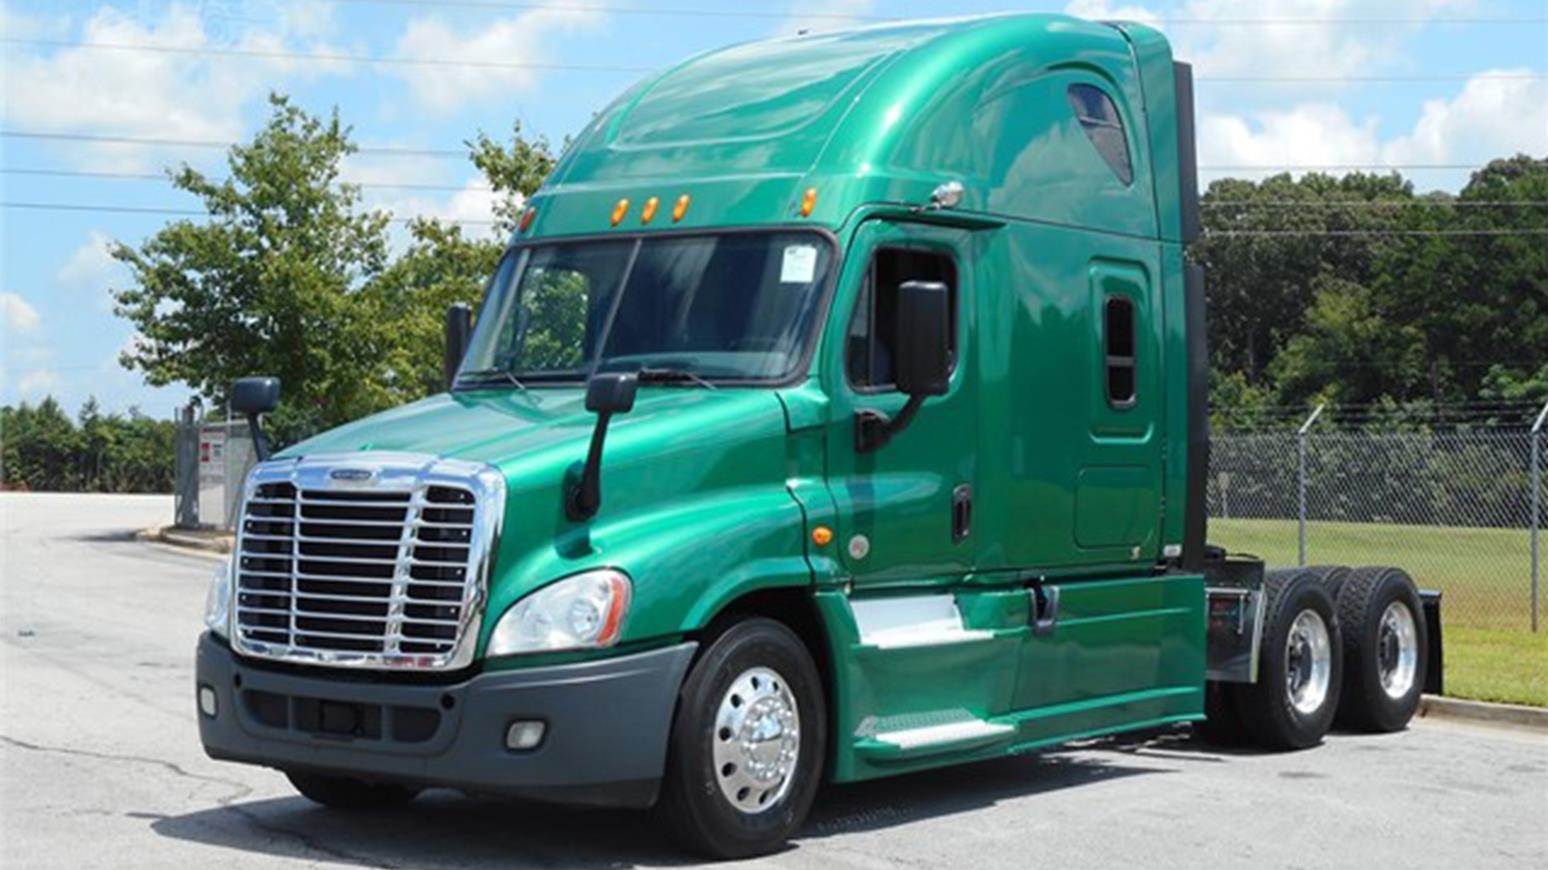 Freightliner Cascadia Conventional Trucks W Sleeper For Sale 2305 Listings Truckpaper Com Page 1 Of 93